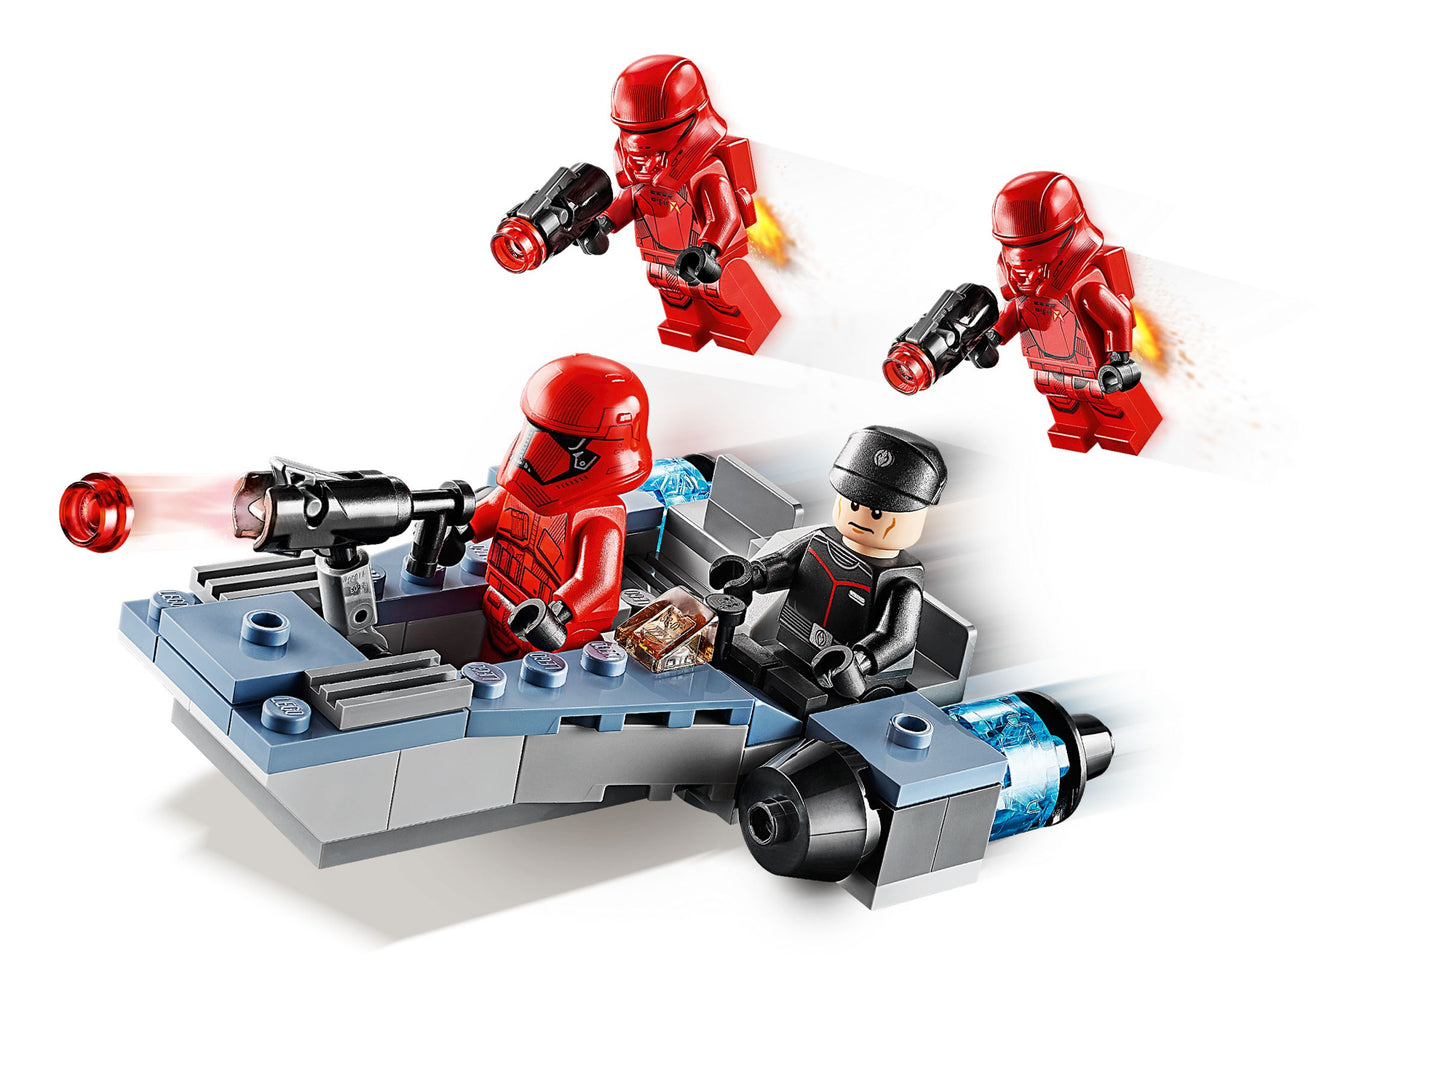 Star Wars 75266 Sith Troopers Battle Pack